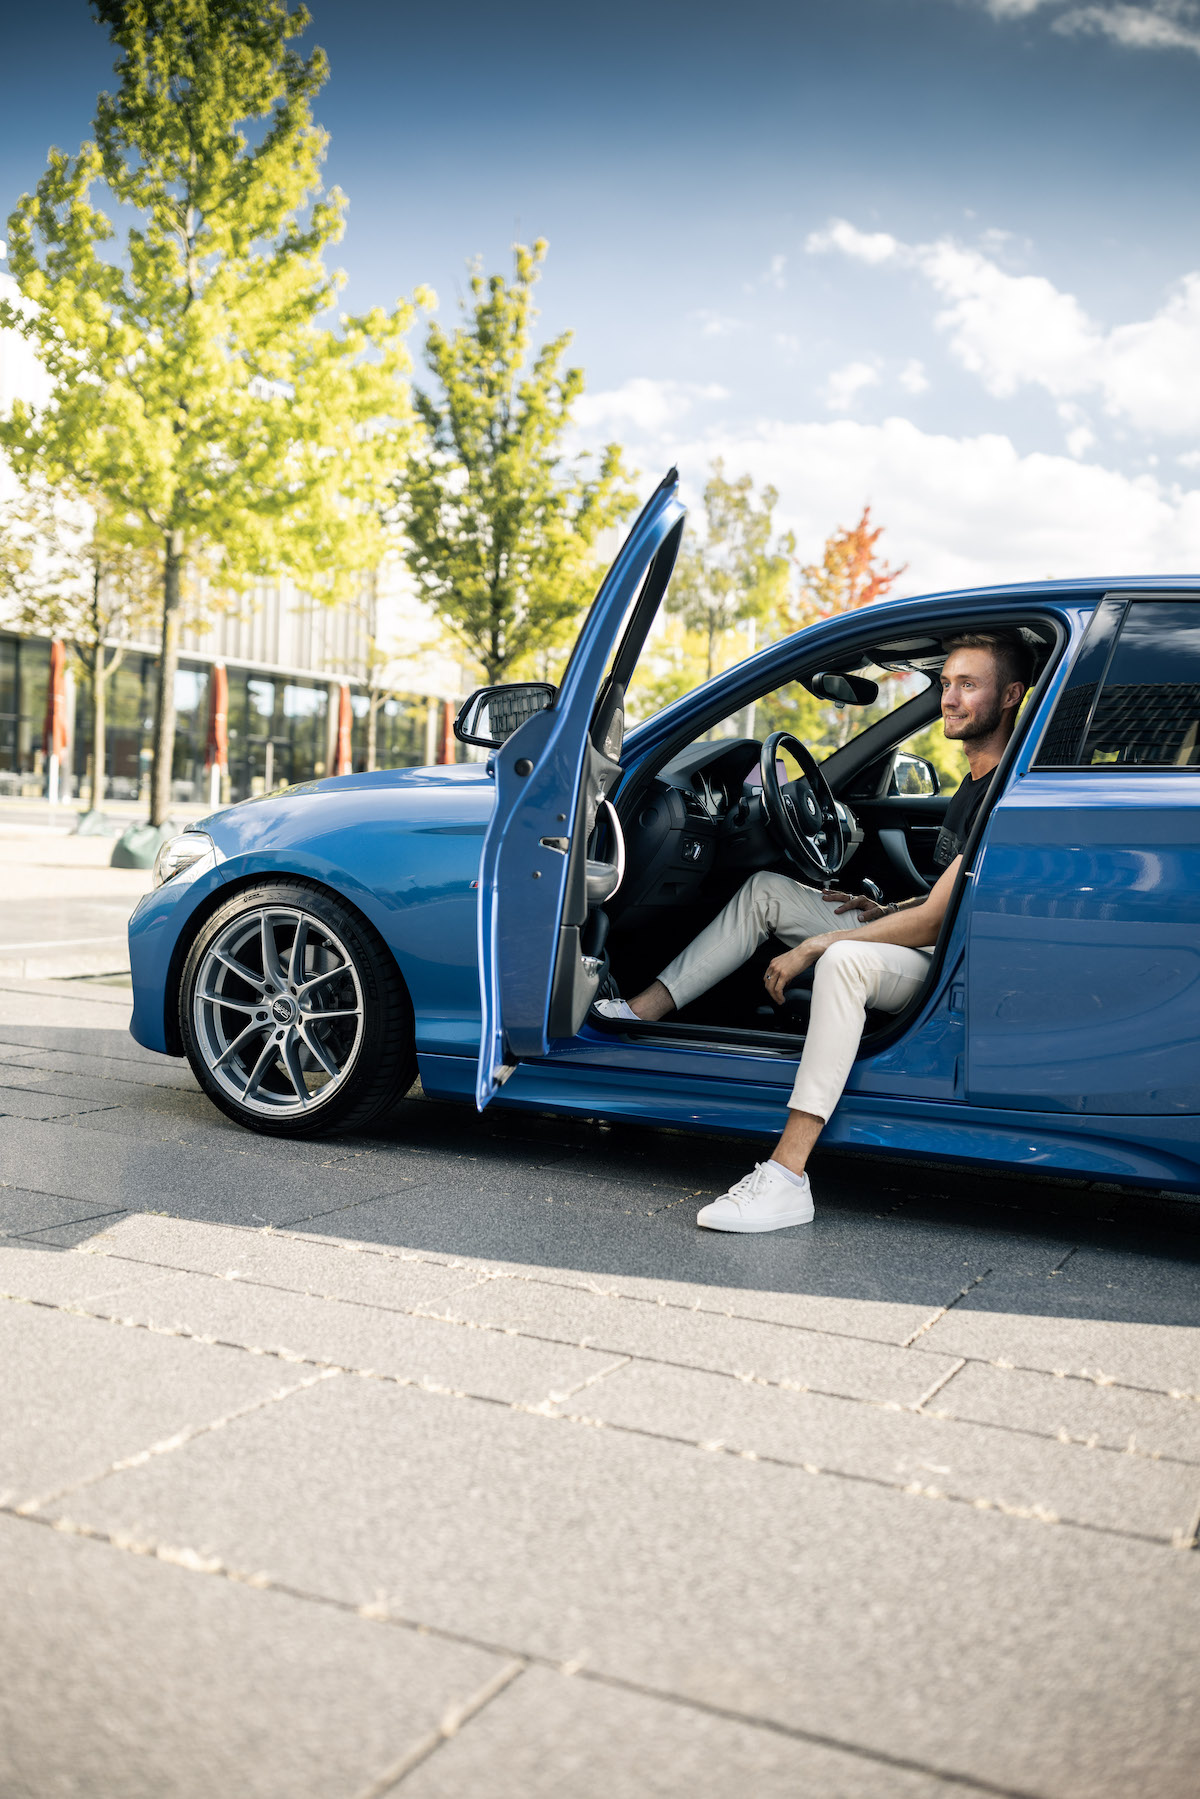 BMW E46 tuning: The perfect lowering solution with the right BILSTEIN  sports suspension, e46